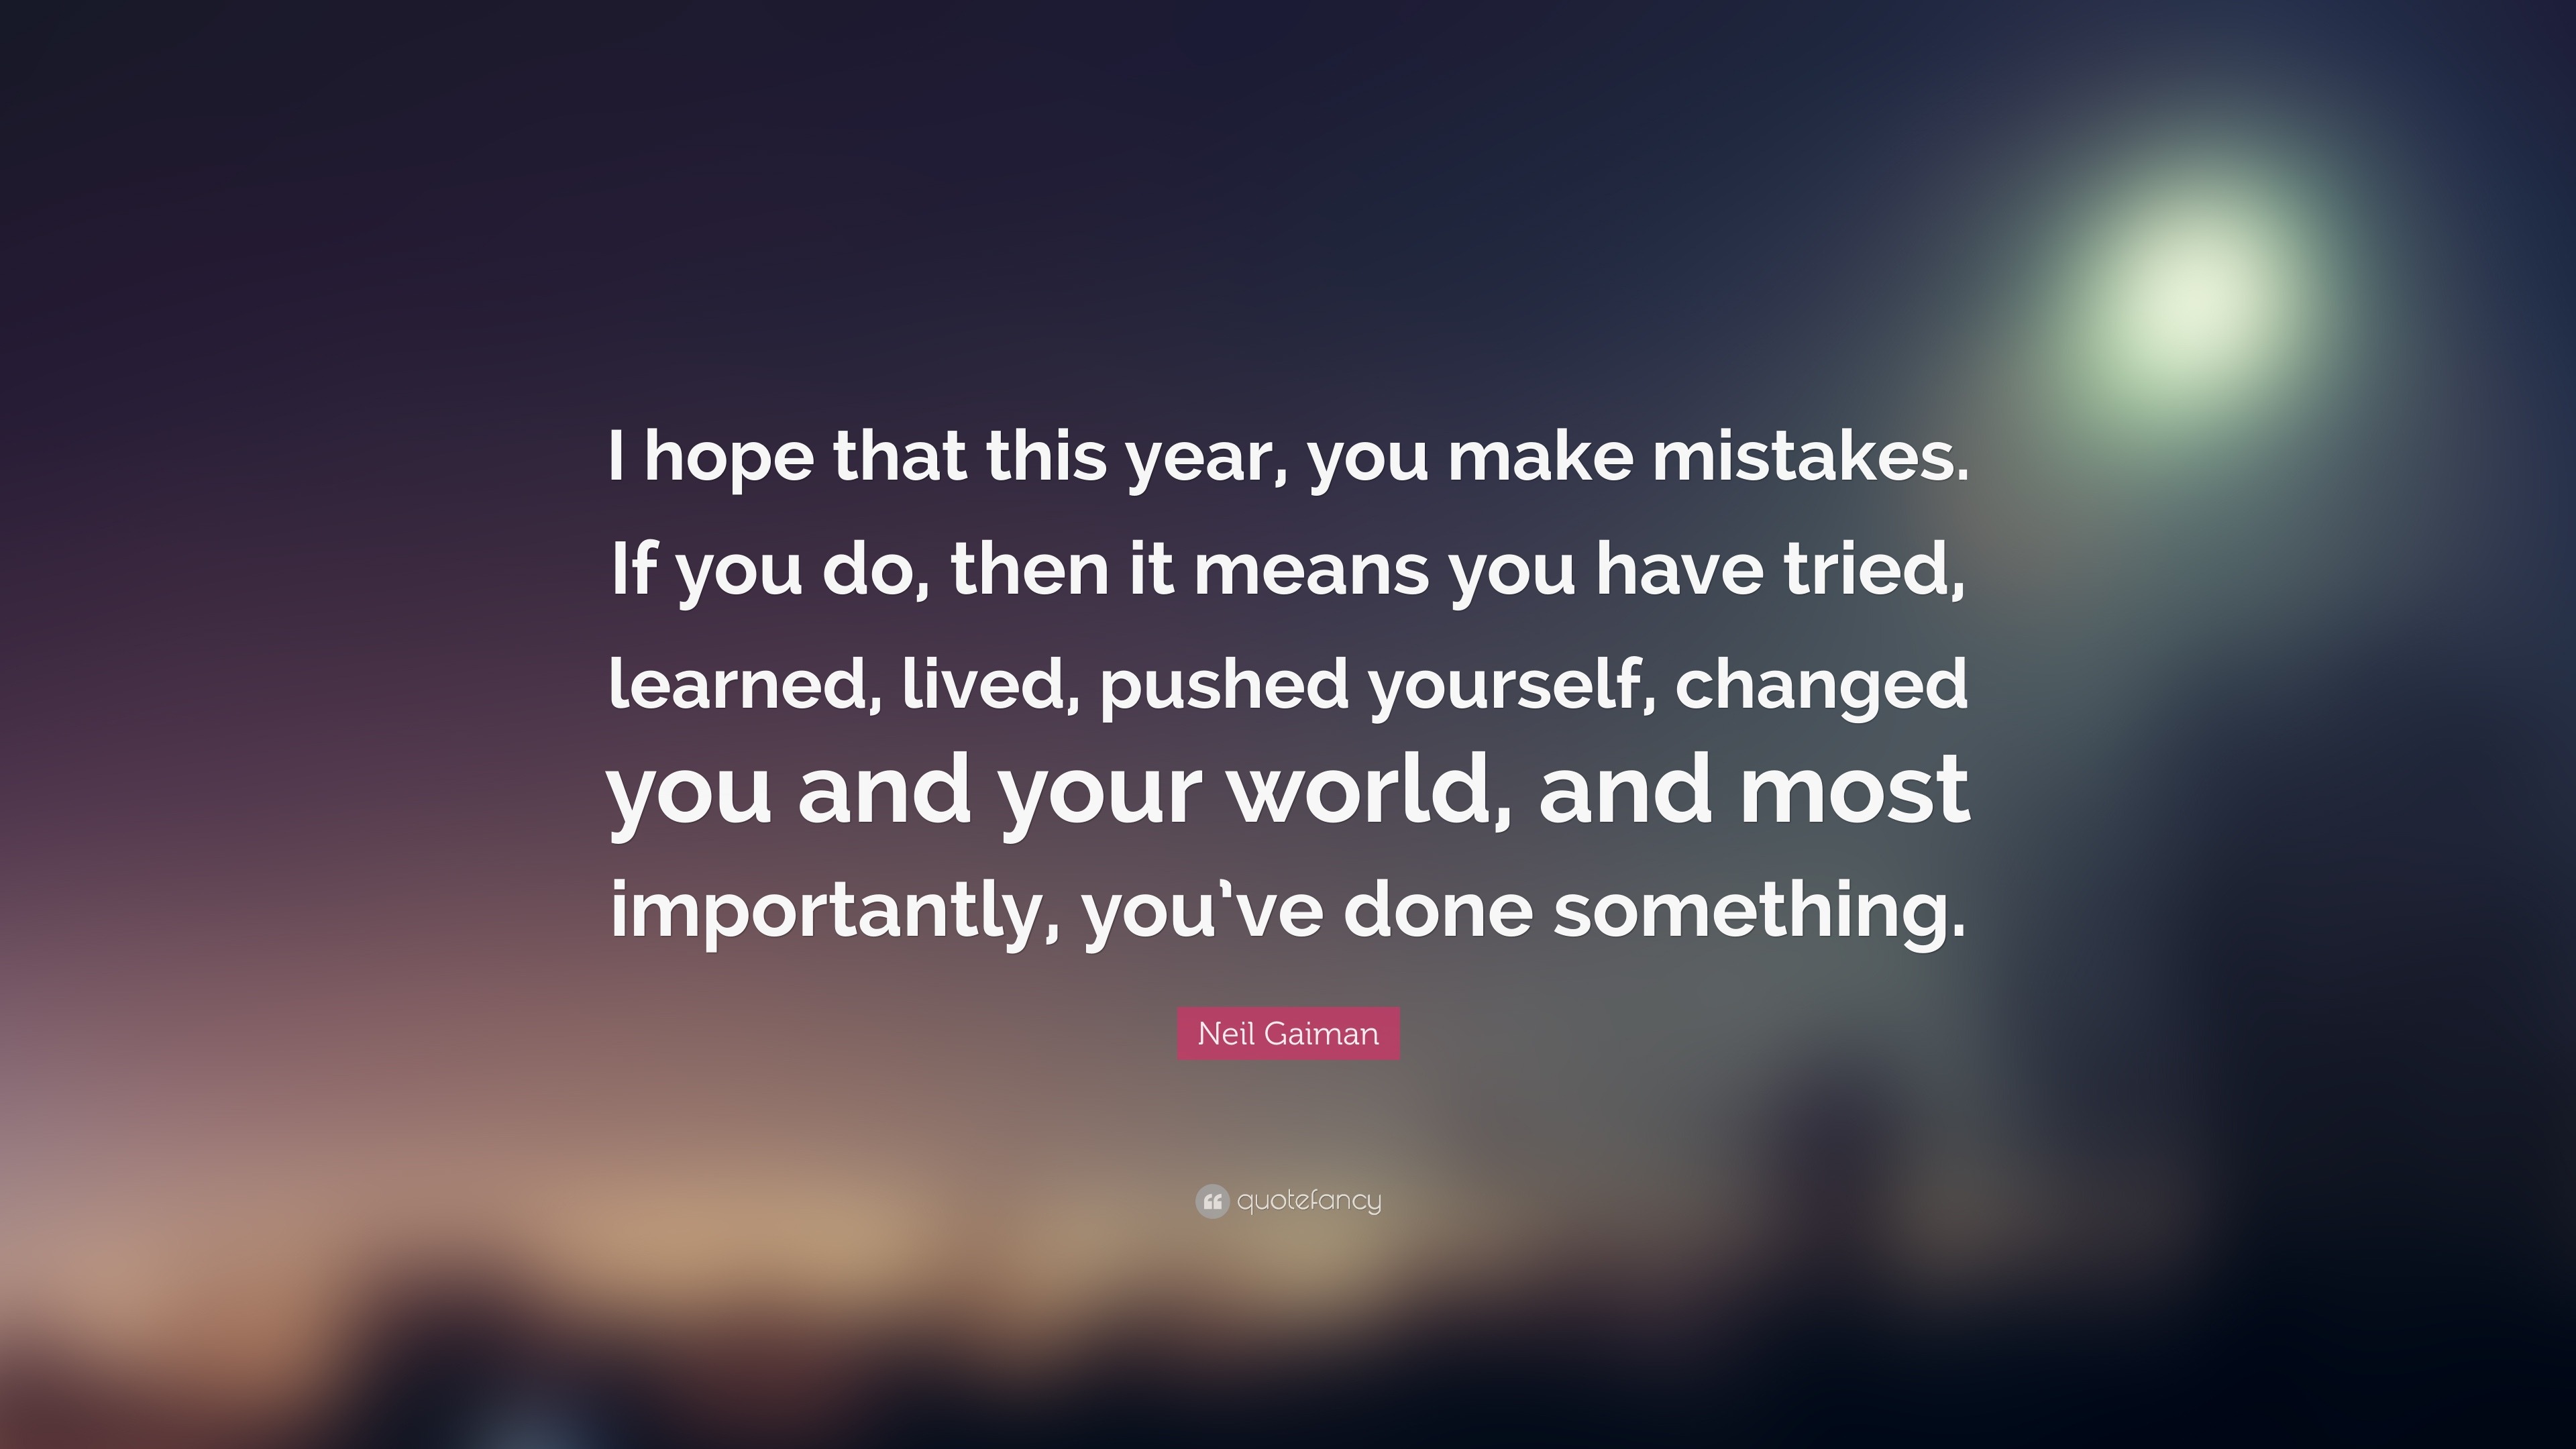 Mistake Quotes “I hope that this year you make mistakes If you